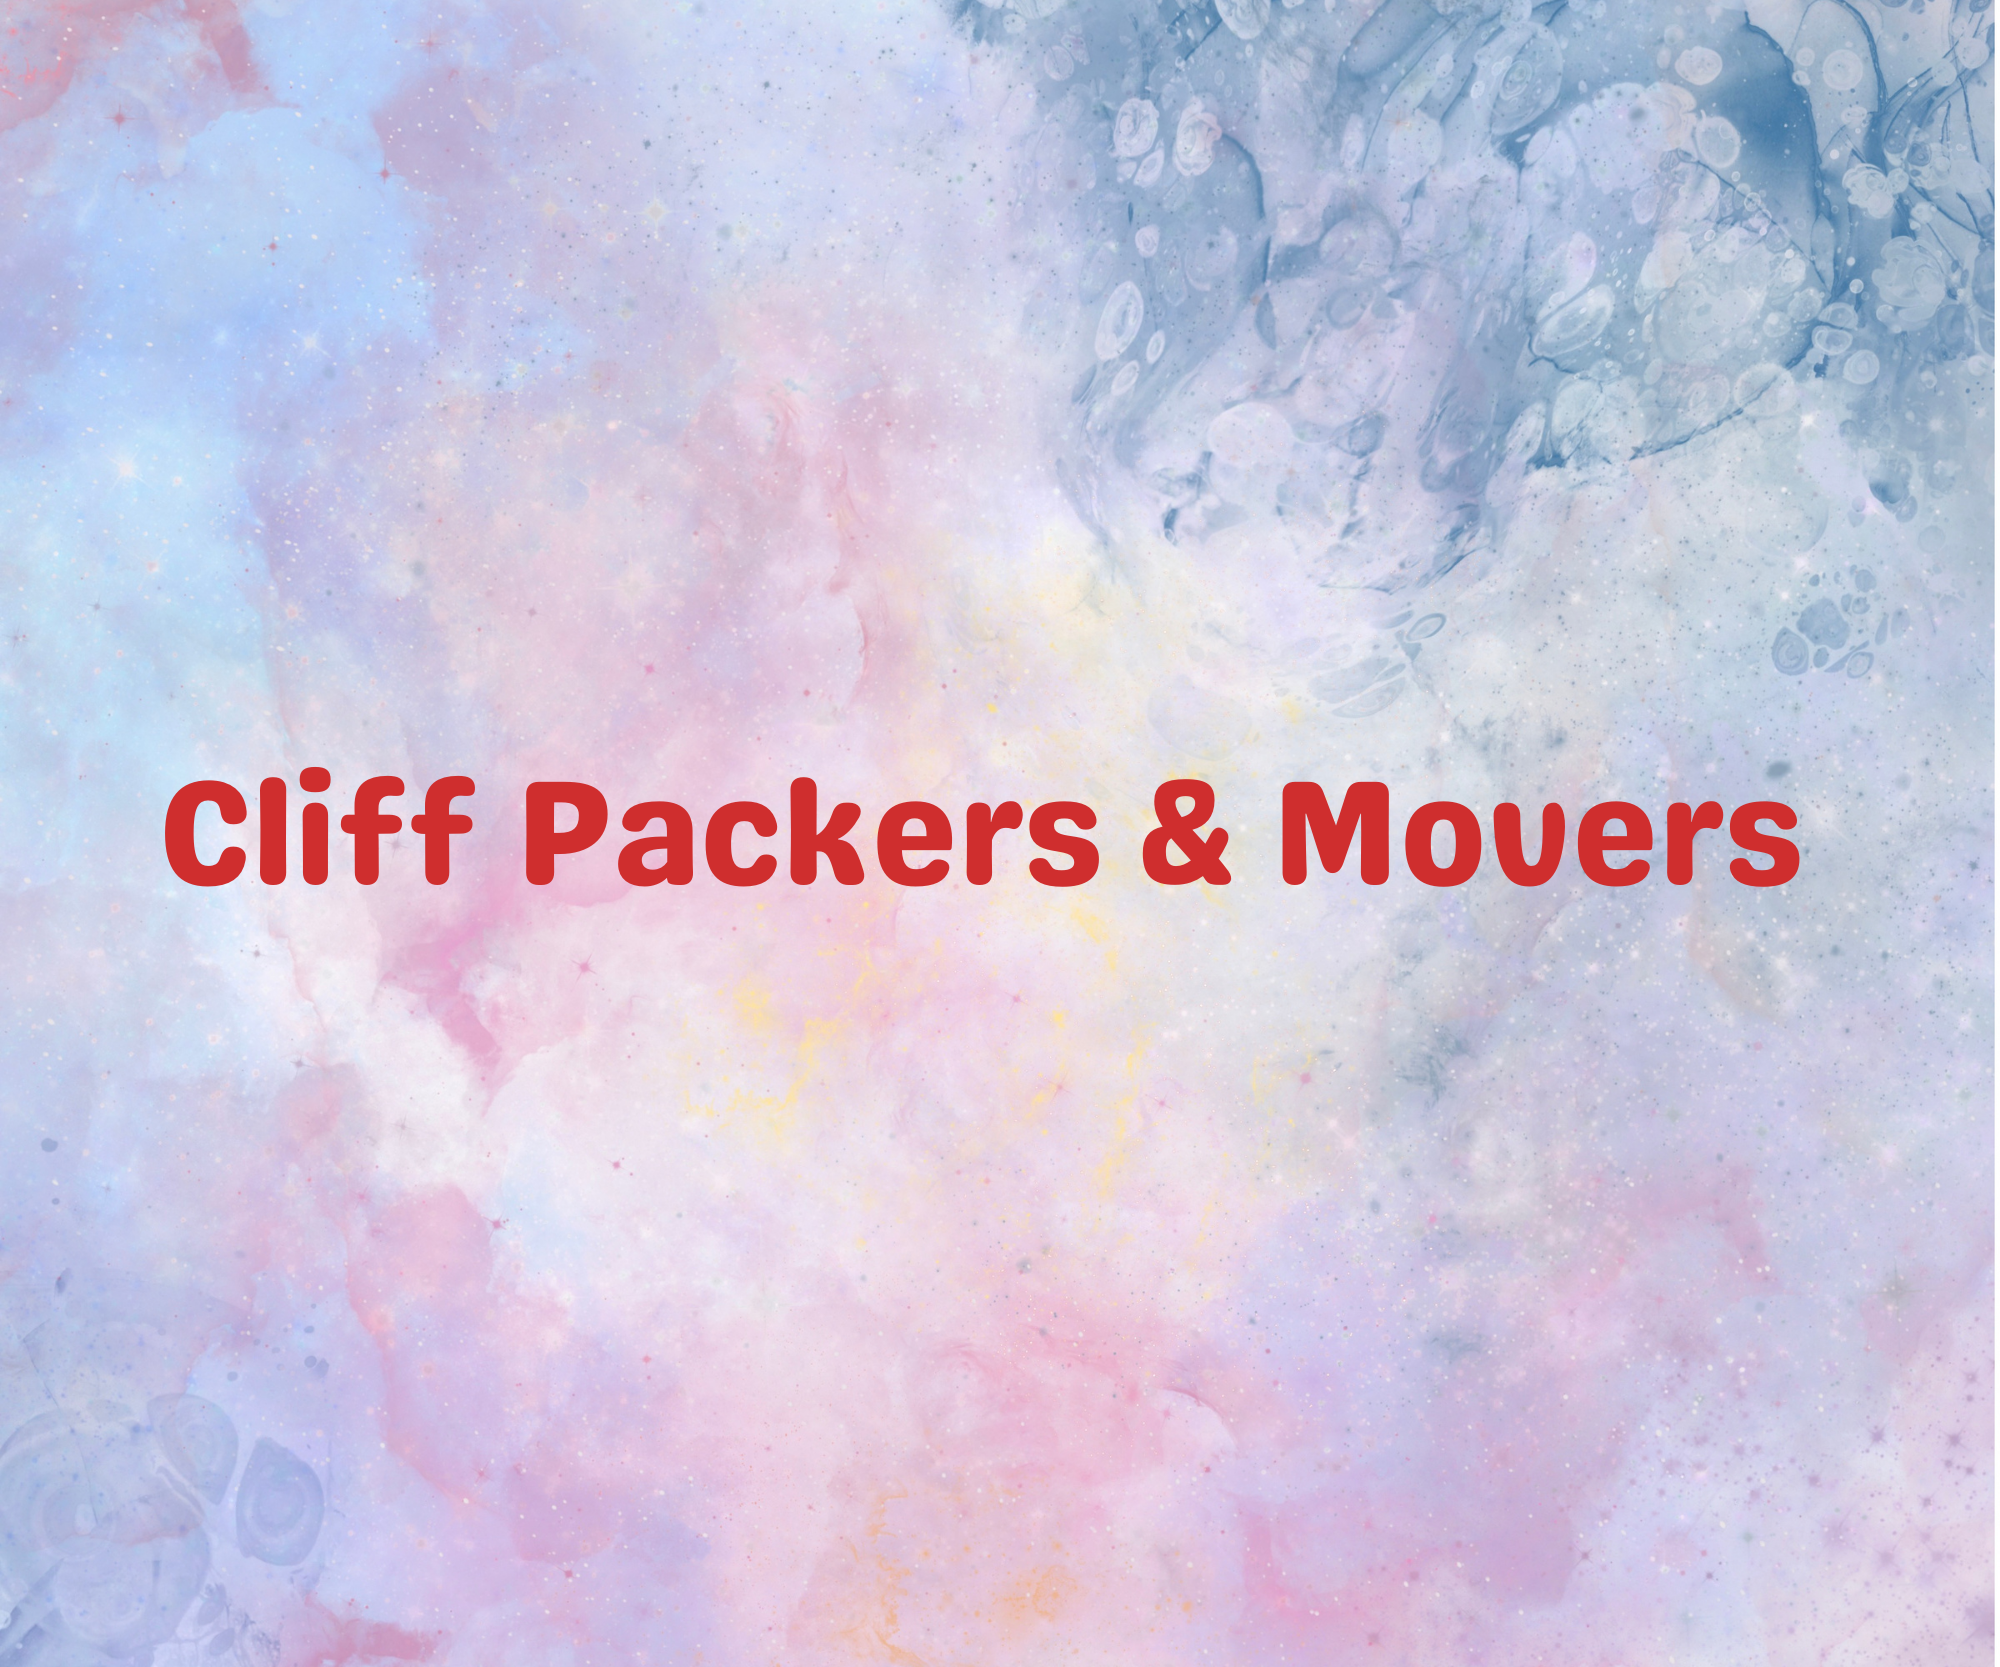 Cliff Packers & Movers,   